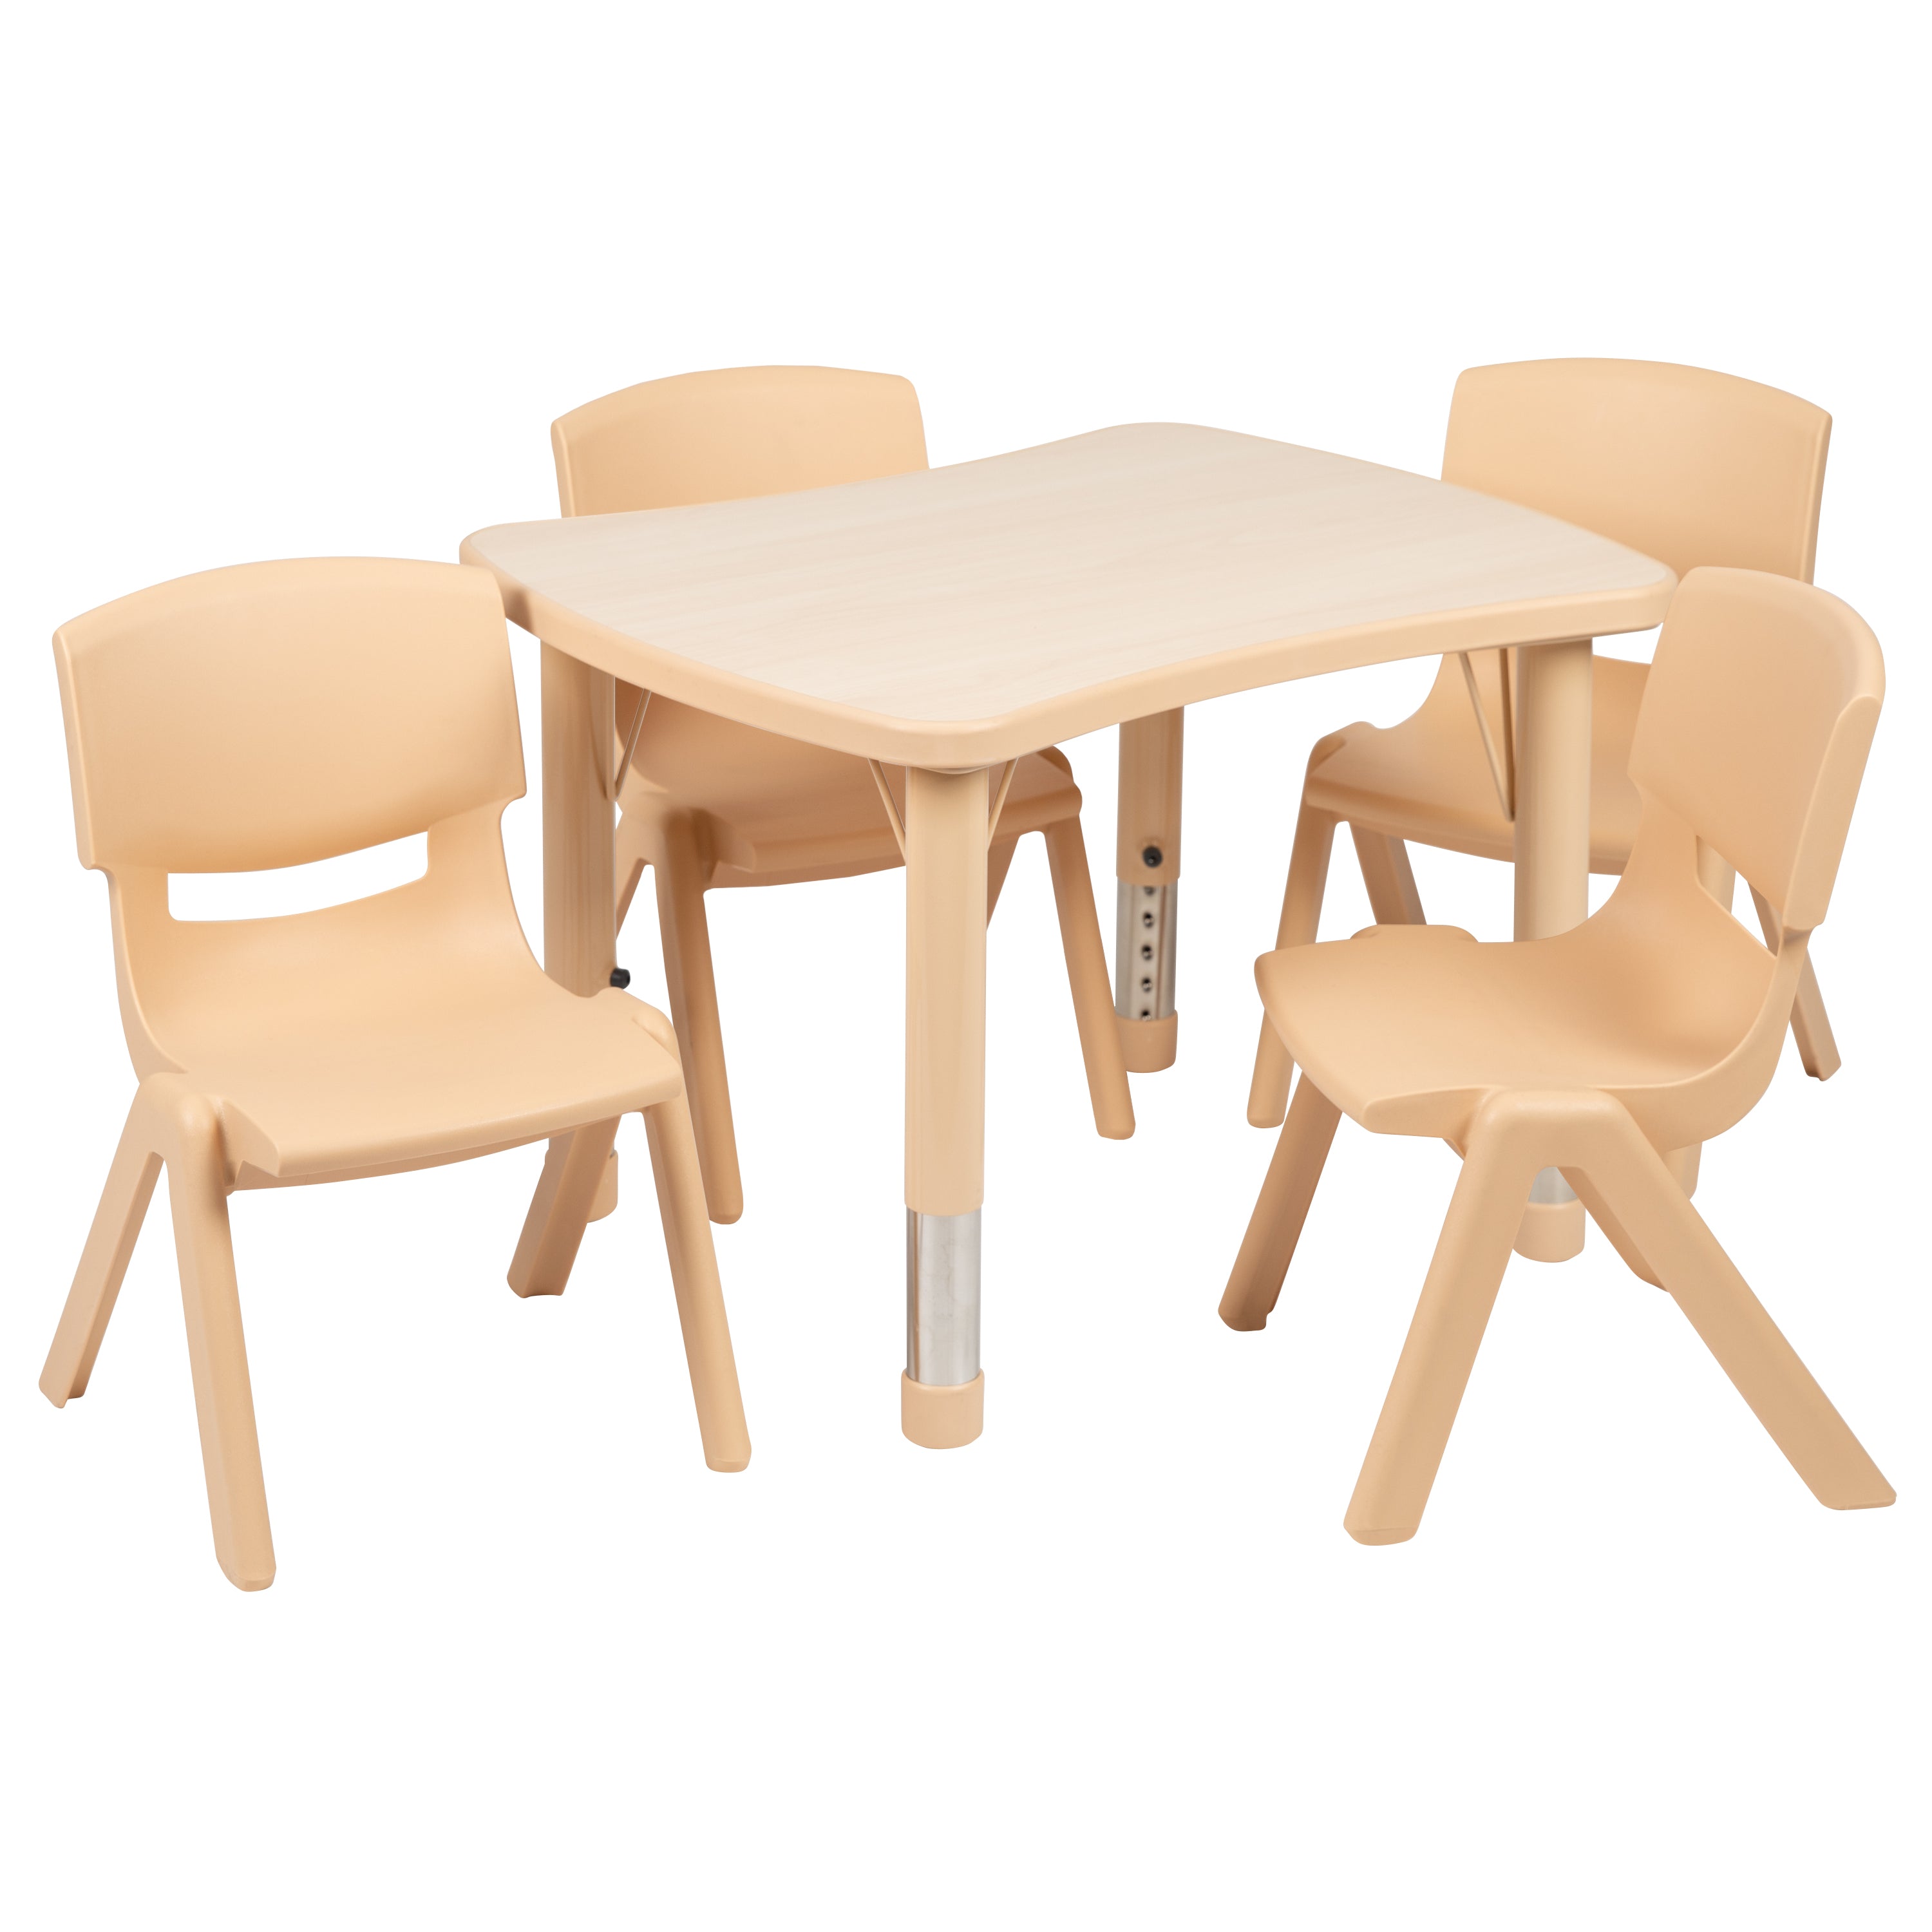 21.875"W x 26.625"L Rectangular Plastic Height Adjustable Activity Table Set with 4 Chairs-Rectangular Activity Table Set-Flash Furniture-Wall2Wall Furnishings